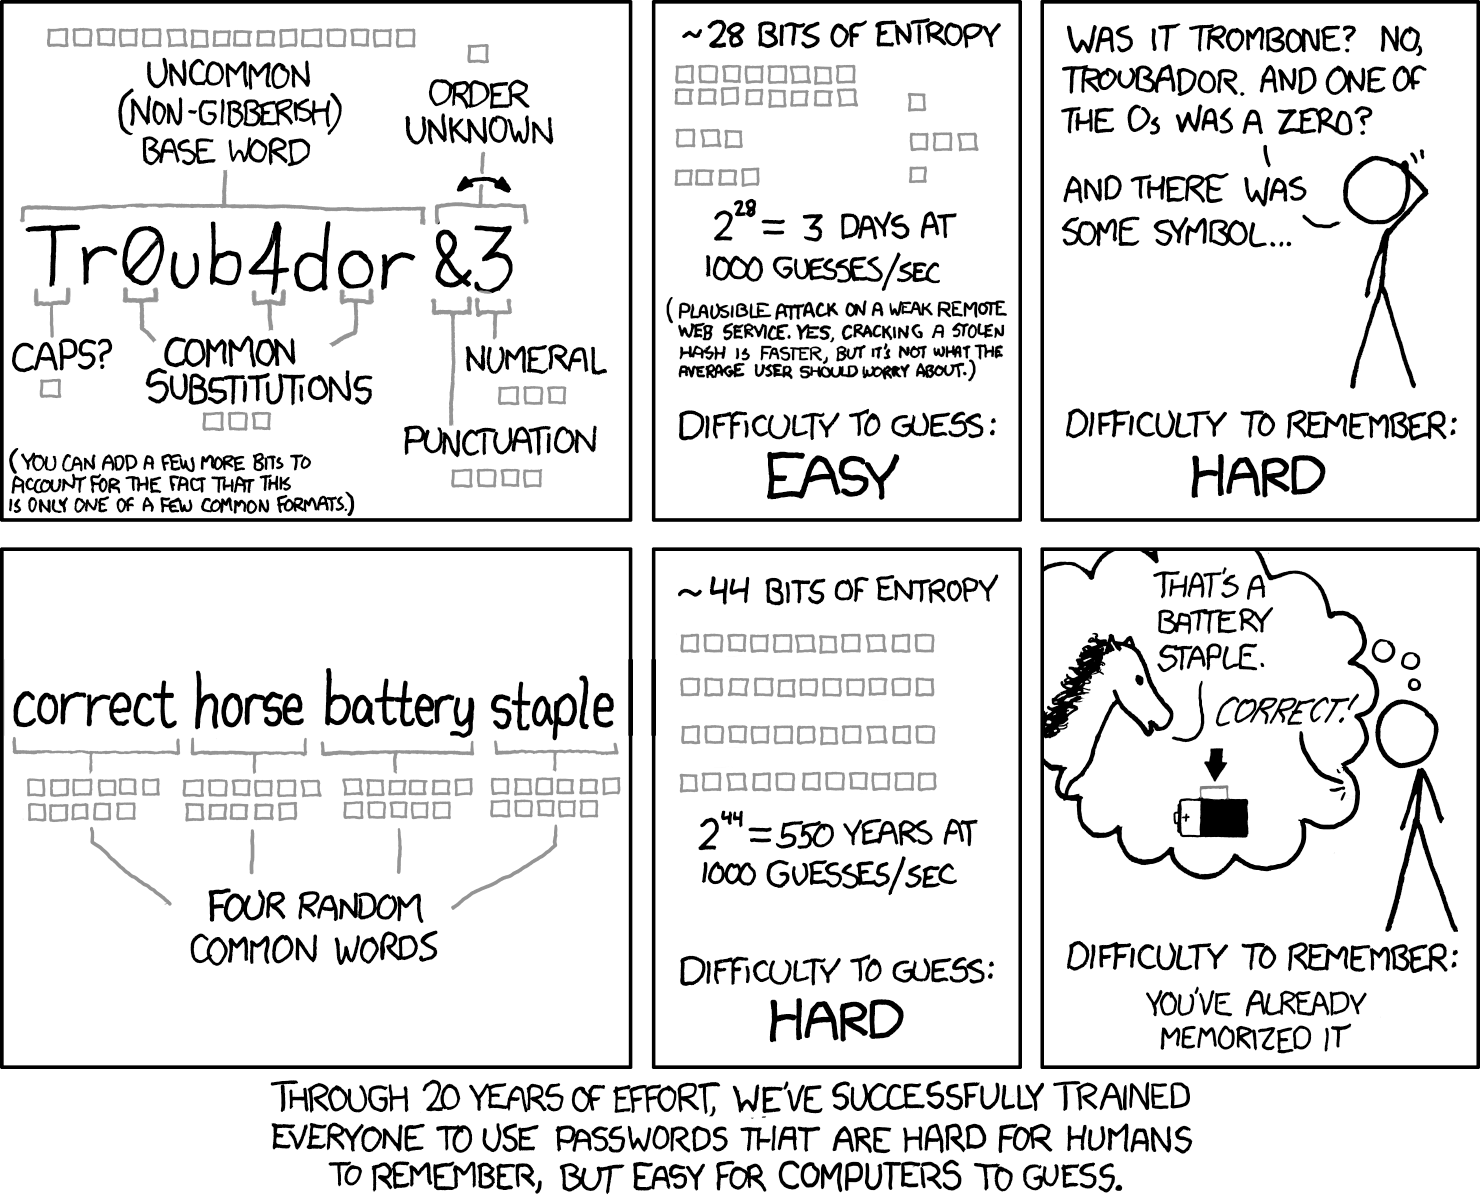 XKCD comic about how short passwords with special symbols and numbers are less secure and harder to remember than long passwords with only alphabetic characters